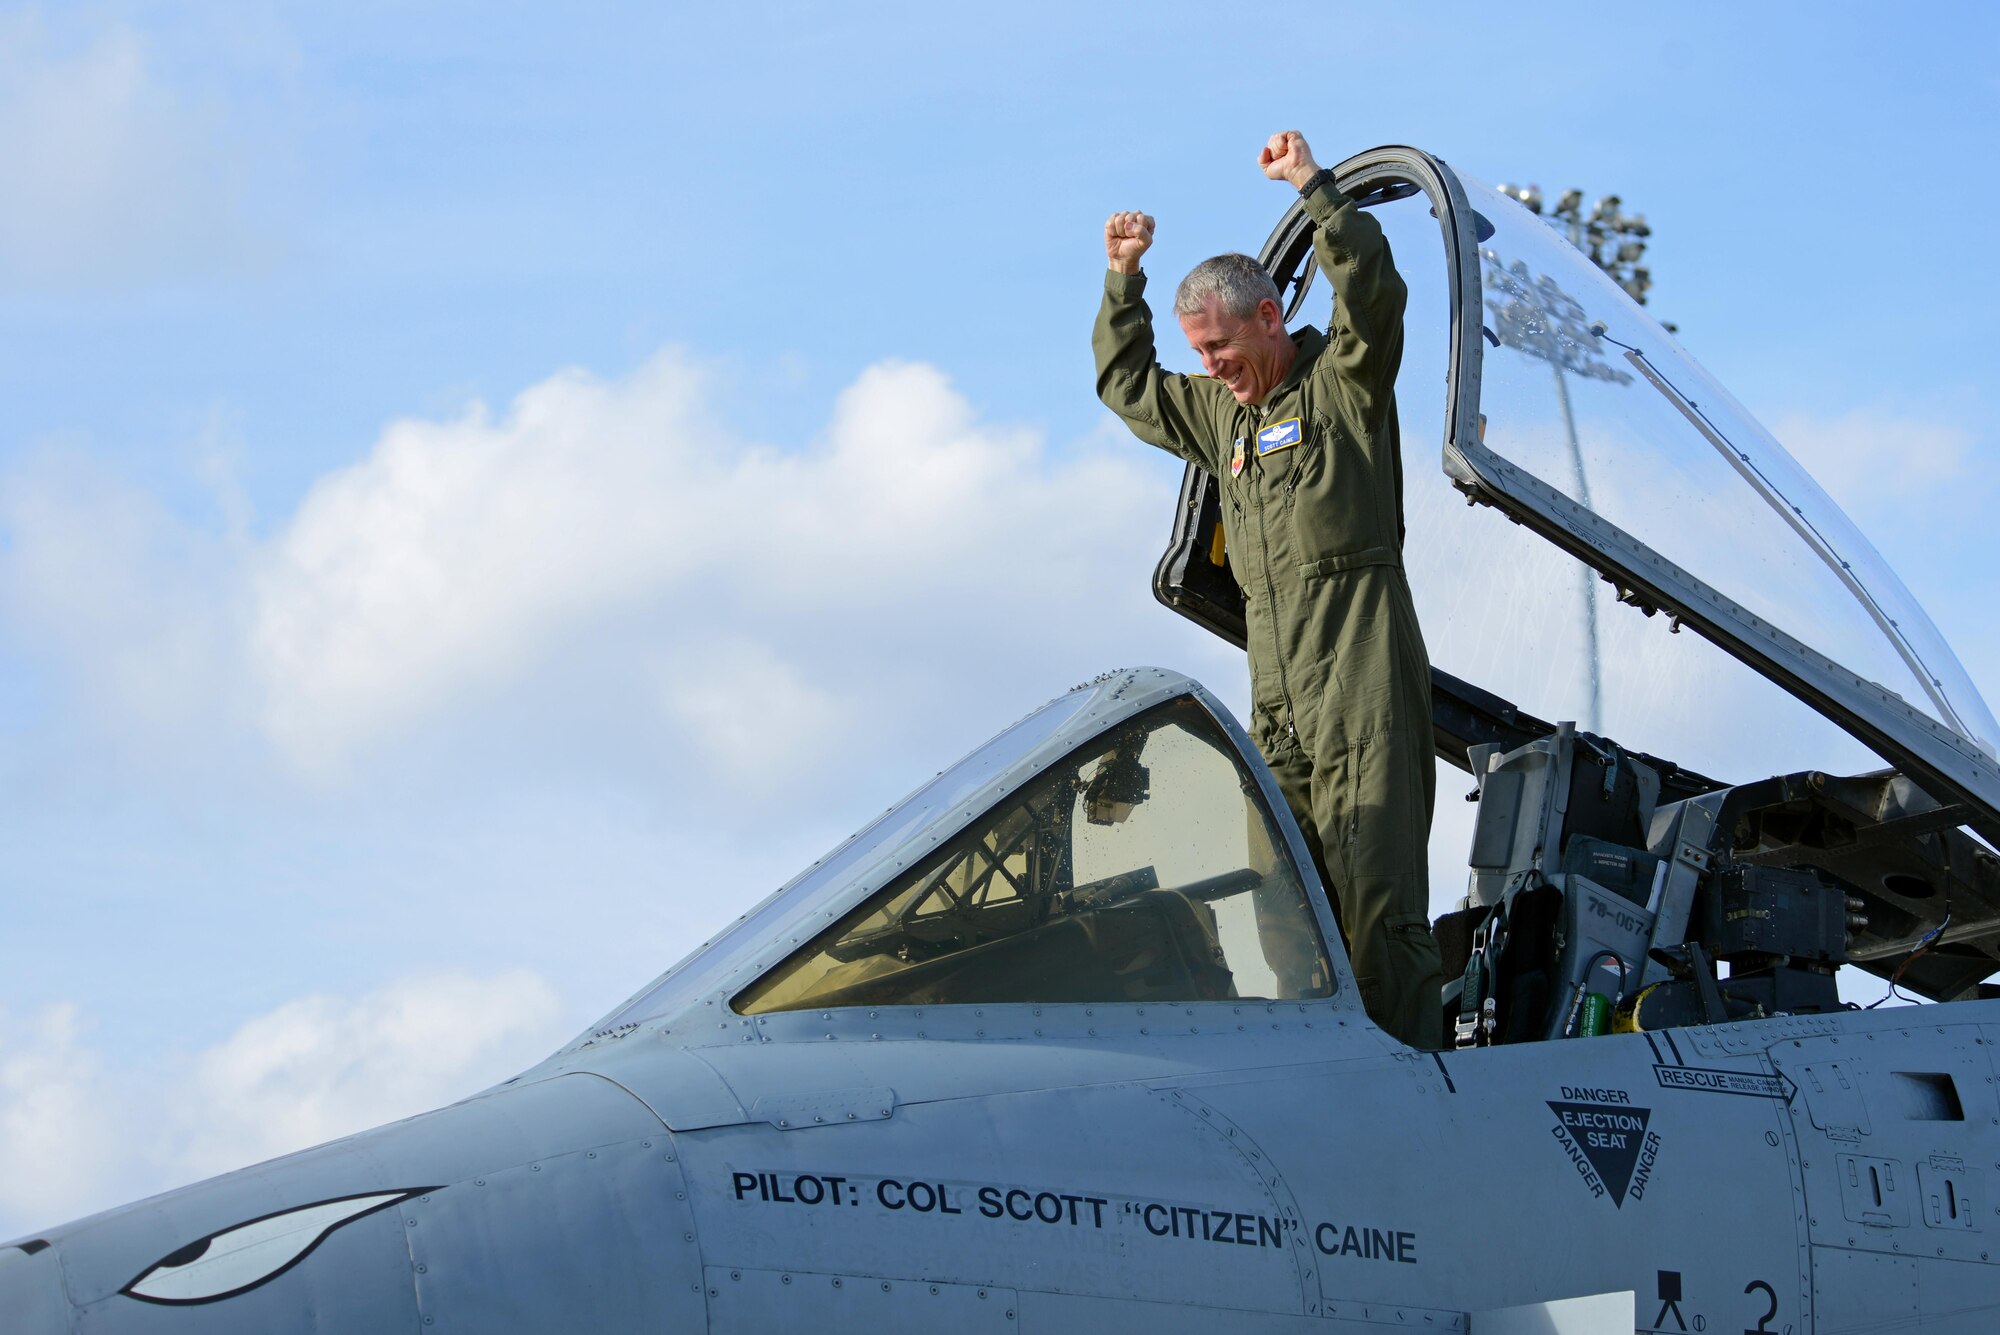 U.S. Air Force Col. Scott Caine, 9th Air Force vice commander, celebrates in an A-10C Thunderbolt II following the final flight of his Air Force career, Shaw Air Force Base, S.C., Feb. 8, 2017. Caine became the 9th AF vice commander in April 2012 after an assignment as the 9th AF director of operations. (U.S. Air Force photo by Airman 1st Class Kathryn R.C. Reaves)